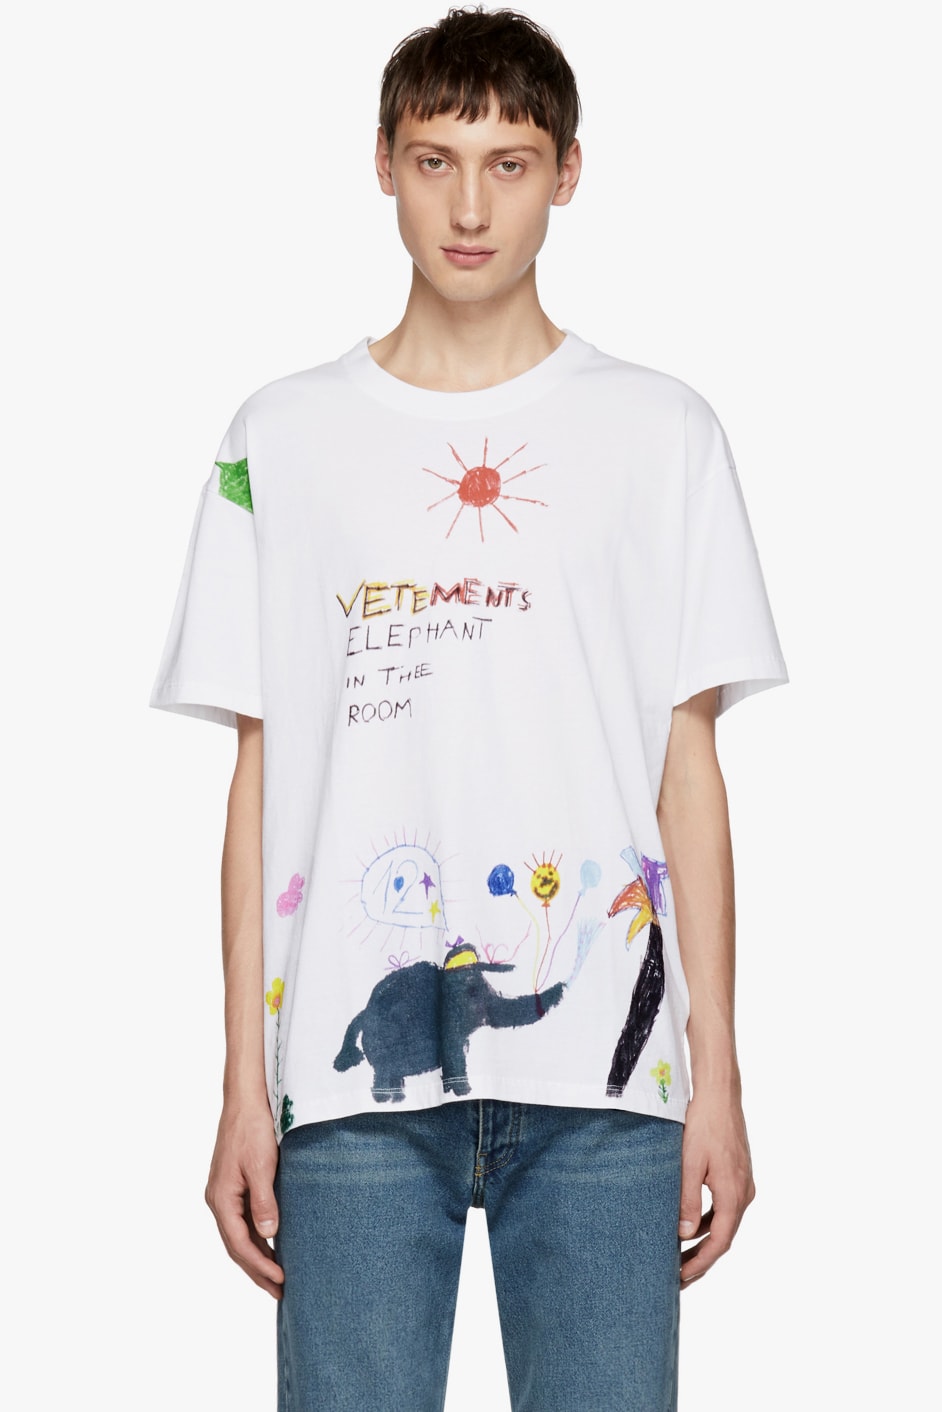 vetements fall winter 2018 tee shirt White Elephant Red Sun T-Shirt graphic scribble doodle 490 usd buy purchase sale design children